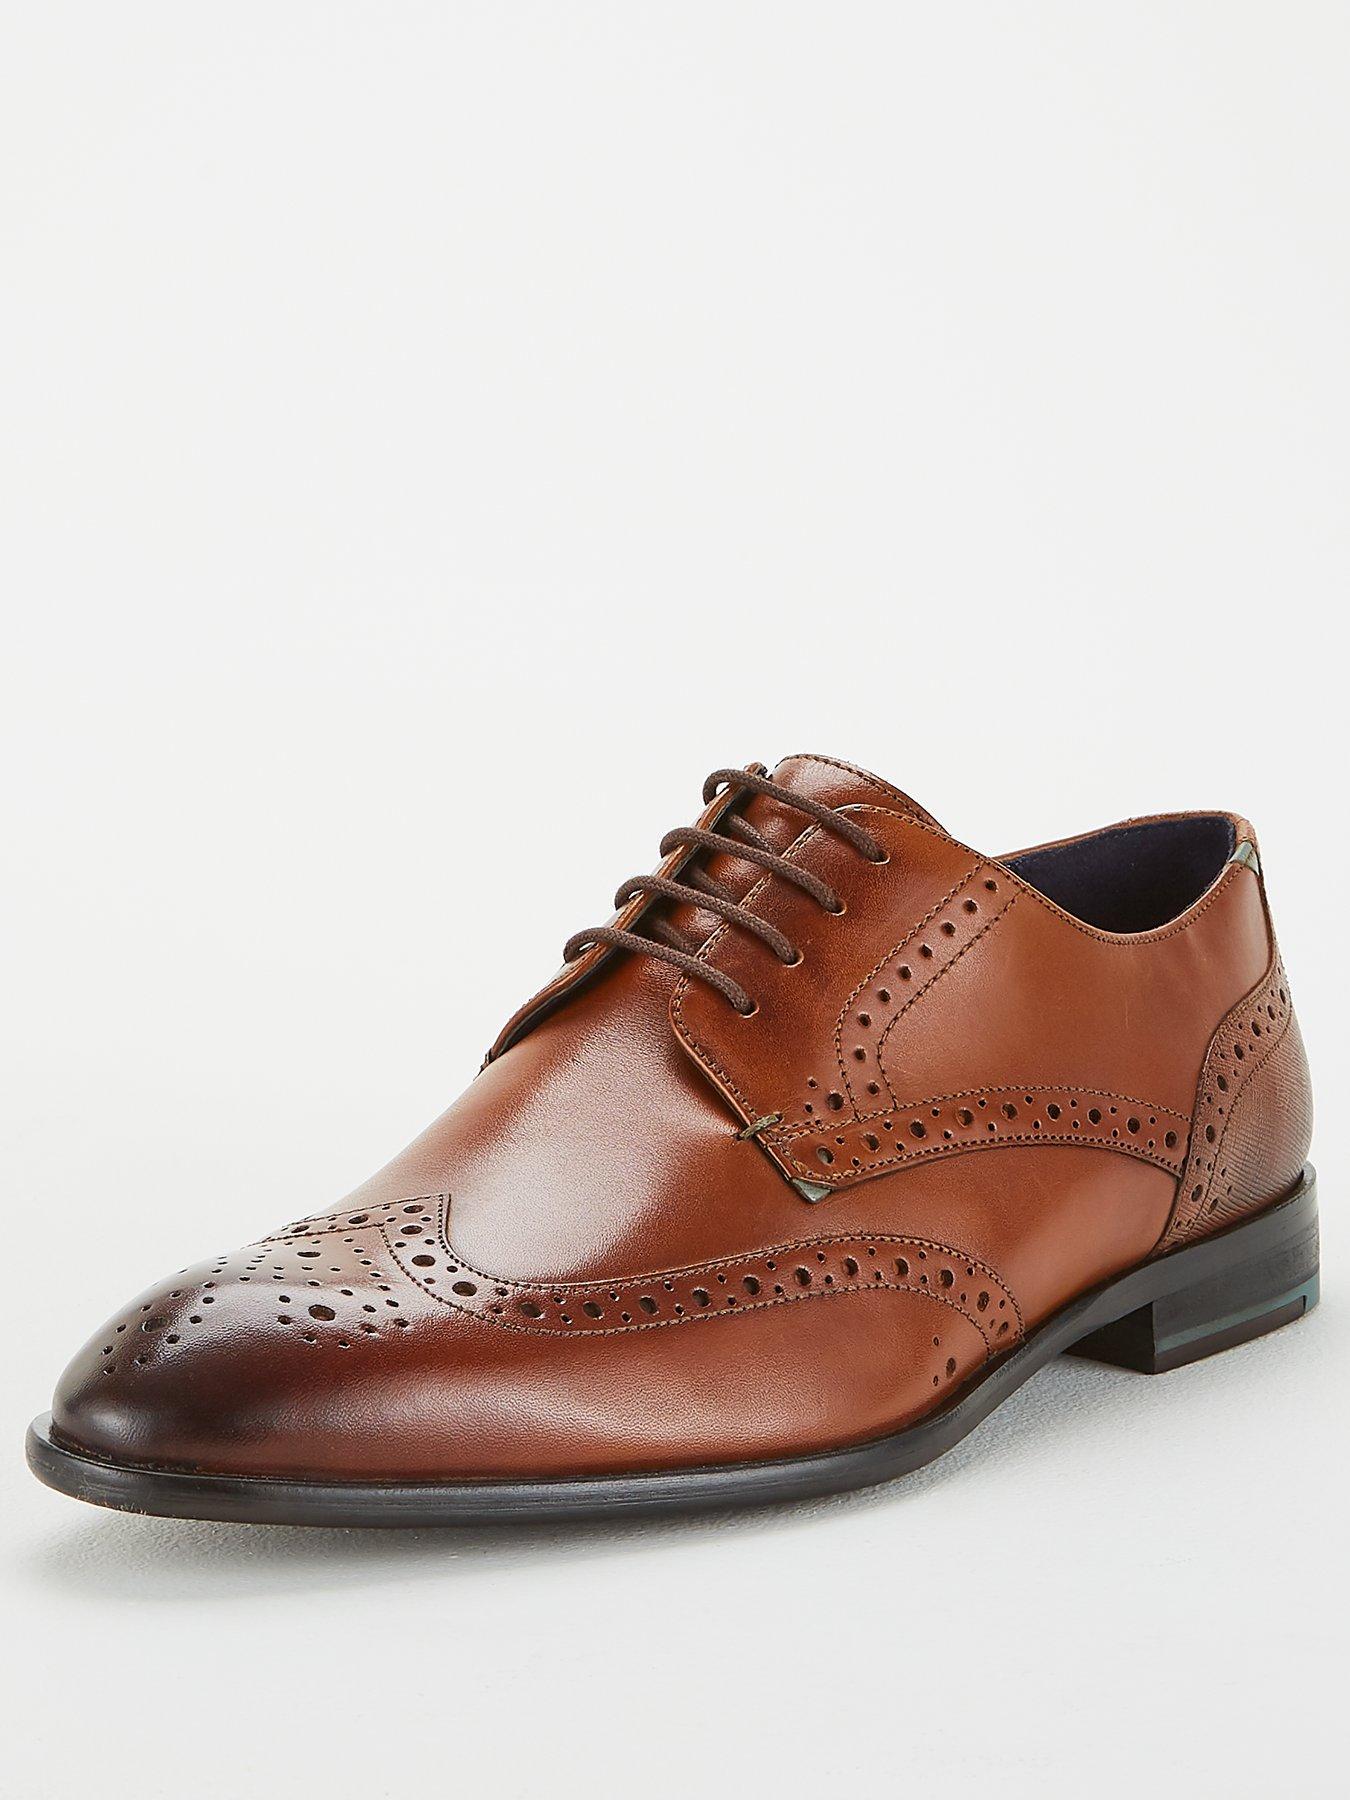 mens ted baker shoes